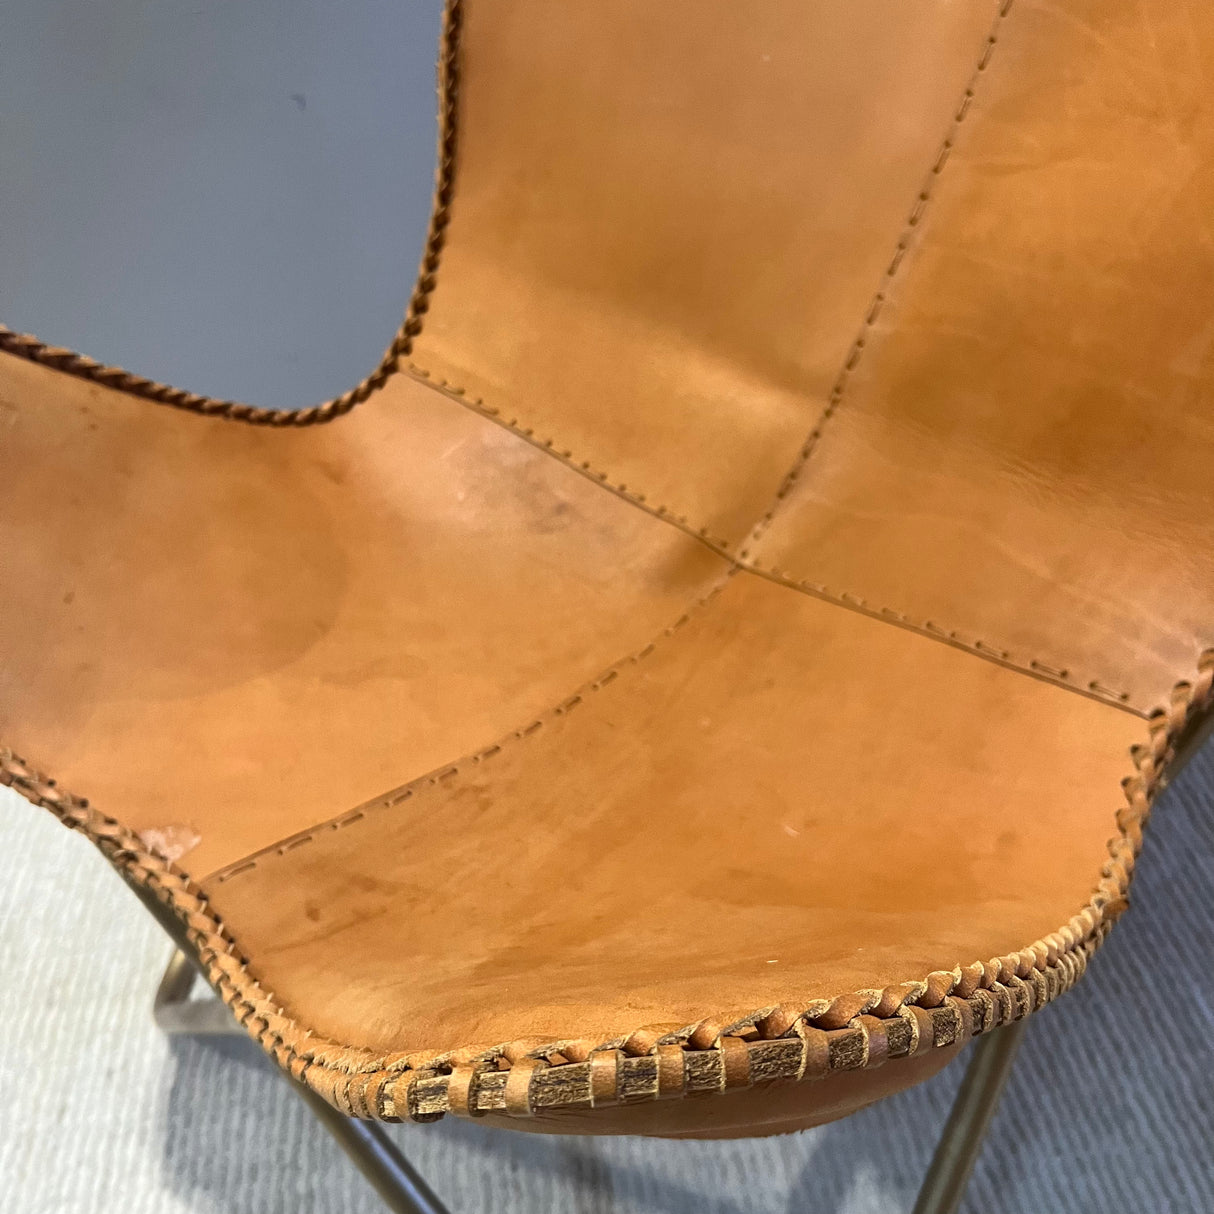 CB2 Tobaco leather butterfly chair